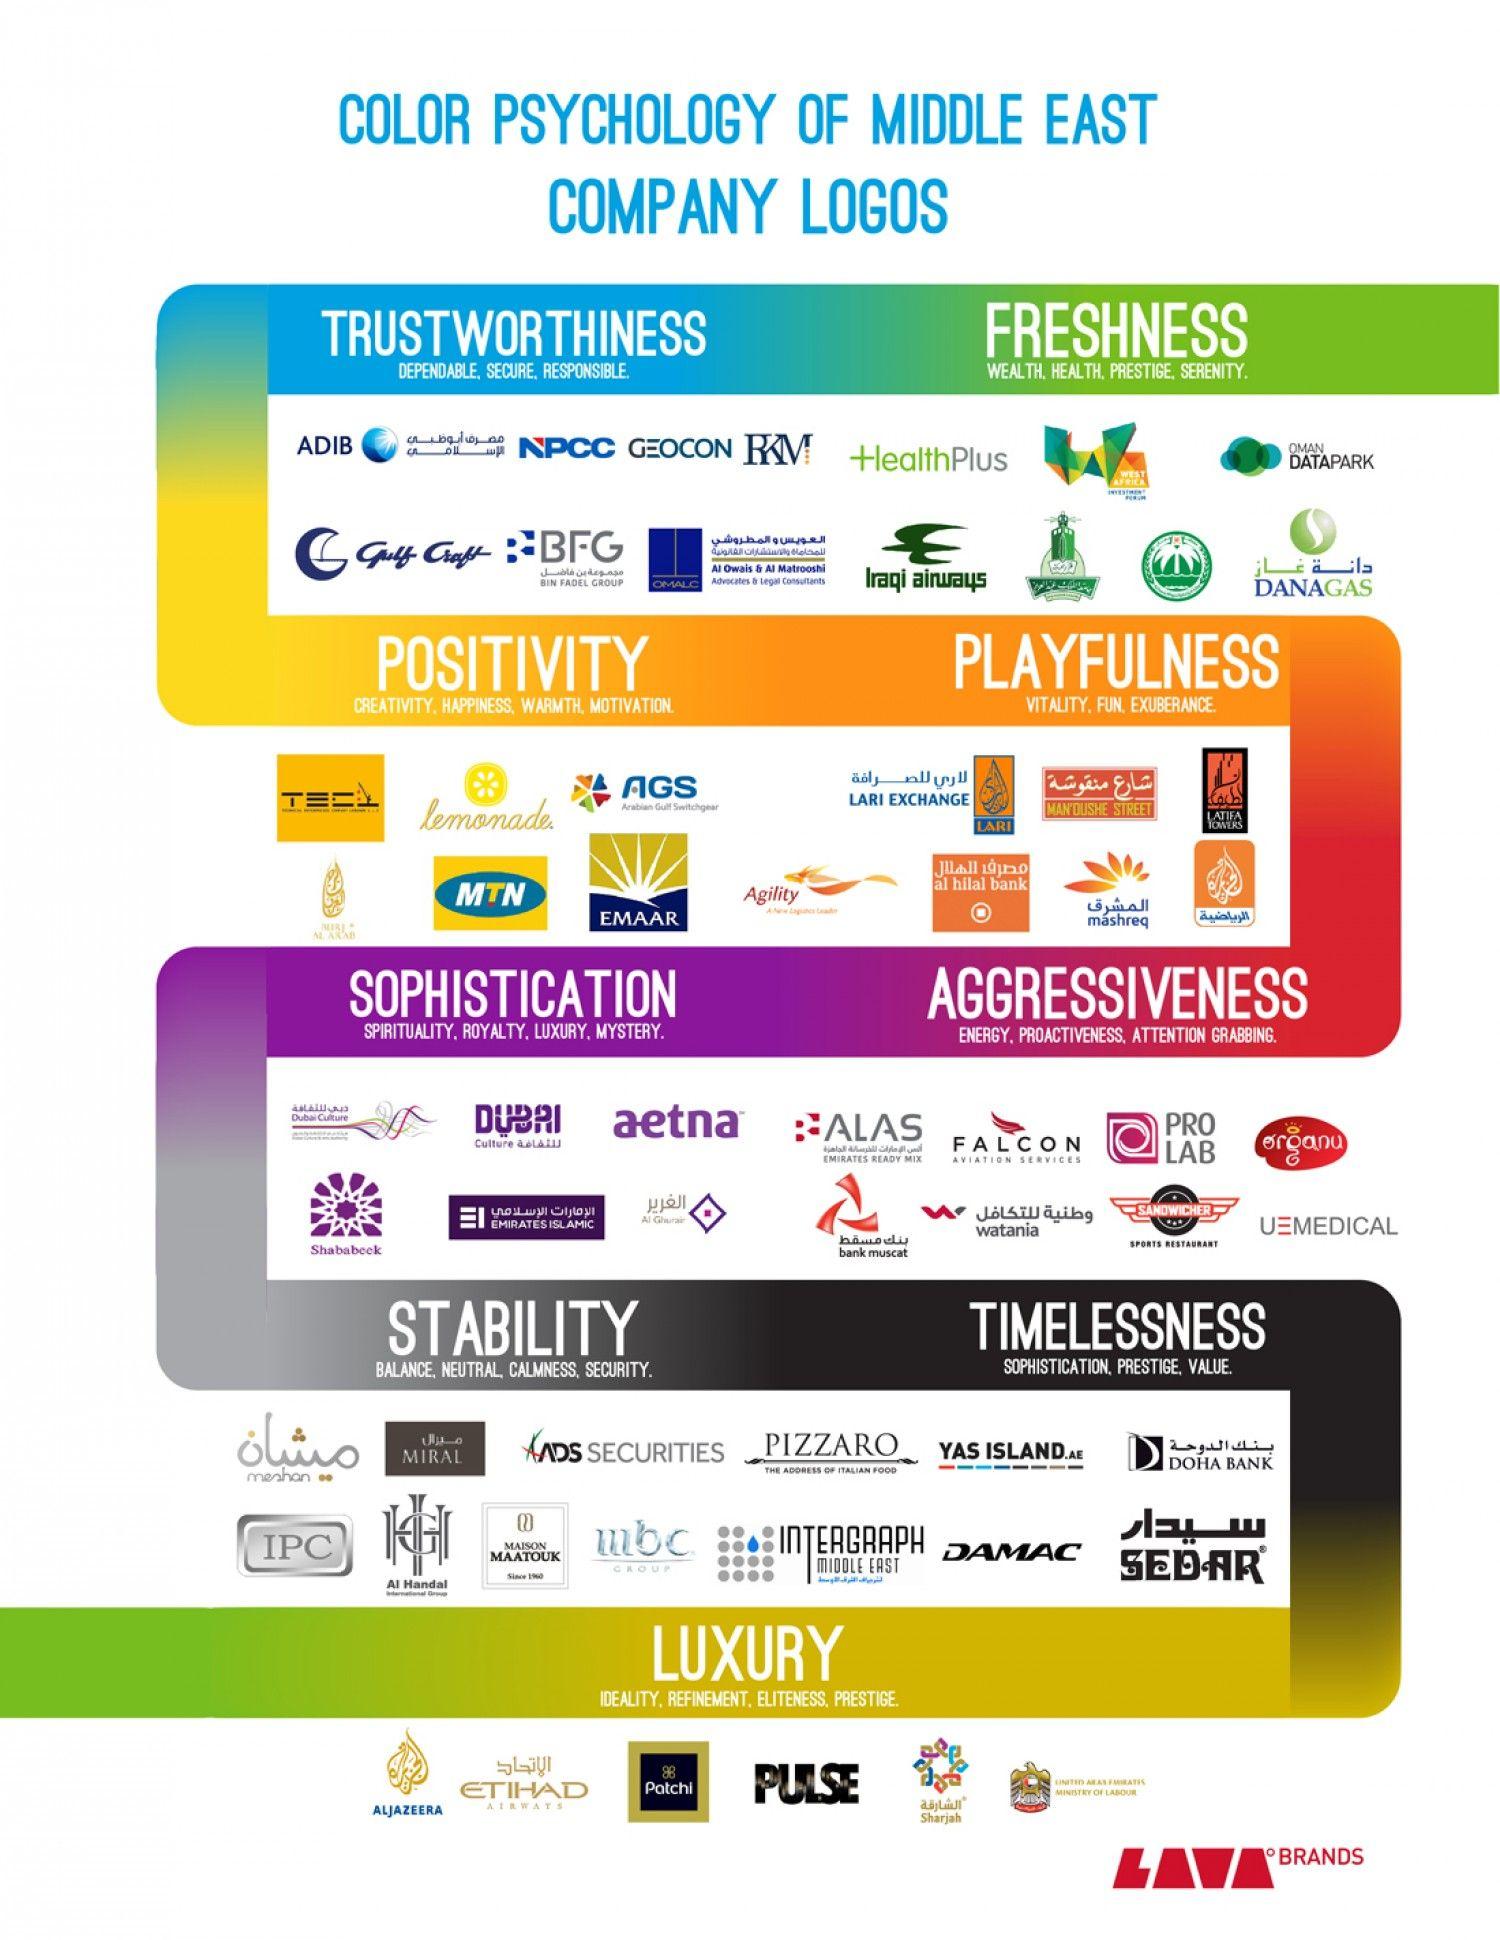 Purple and Organge Company Logo - COLOR PSYCHOLOGY OF MIDDLE EAST COMPANY LOGOS [Infographic] | Visual.ly